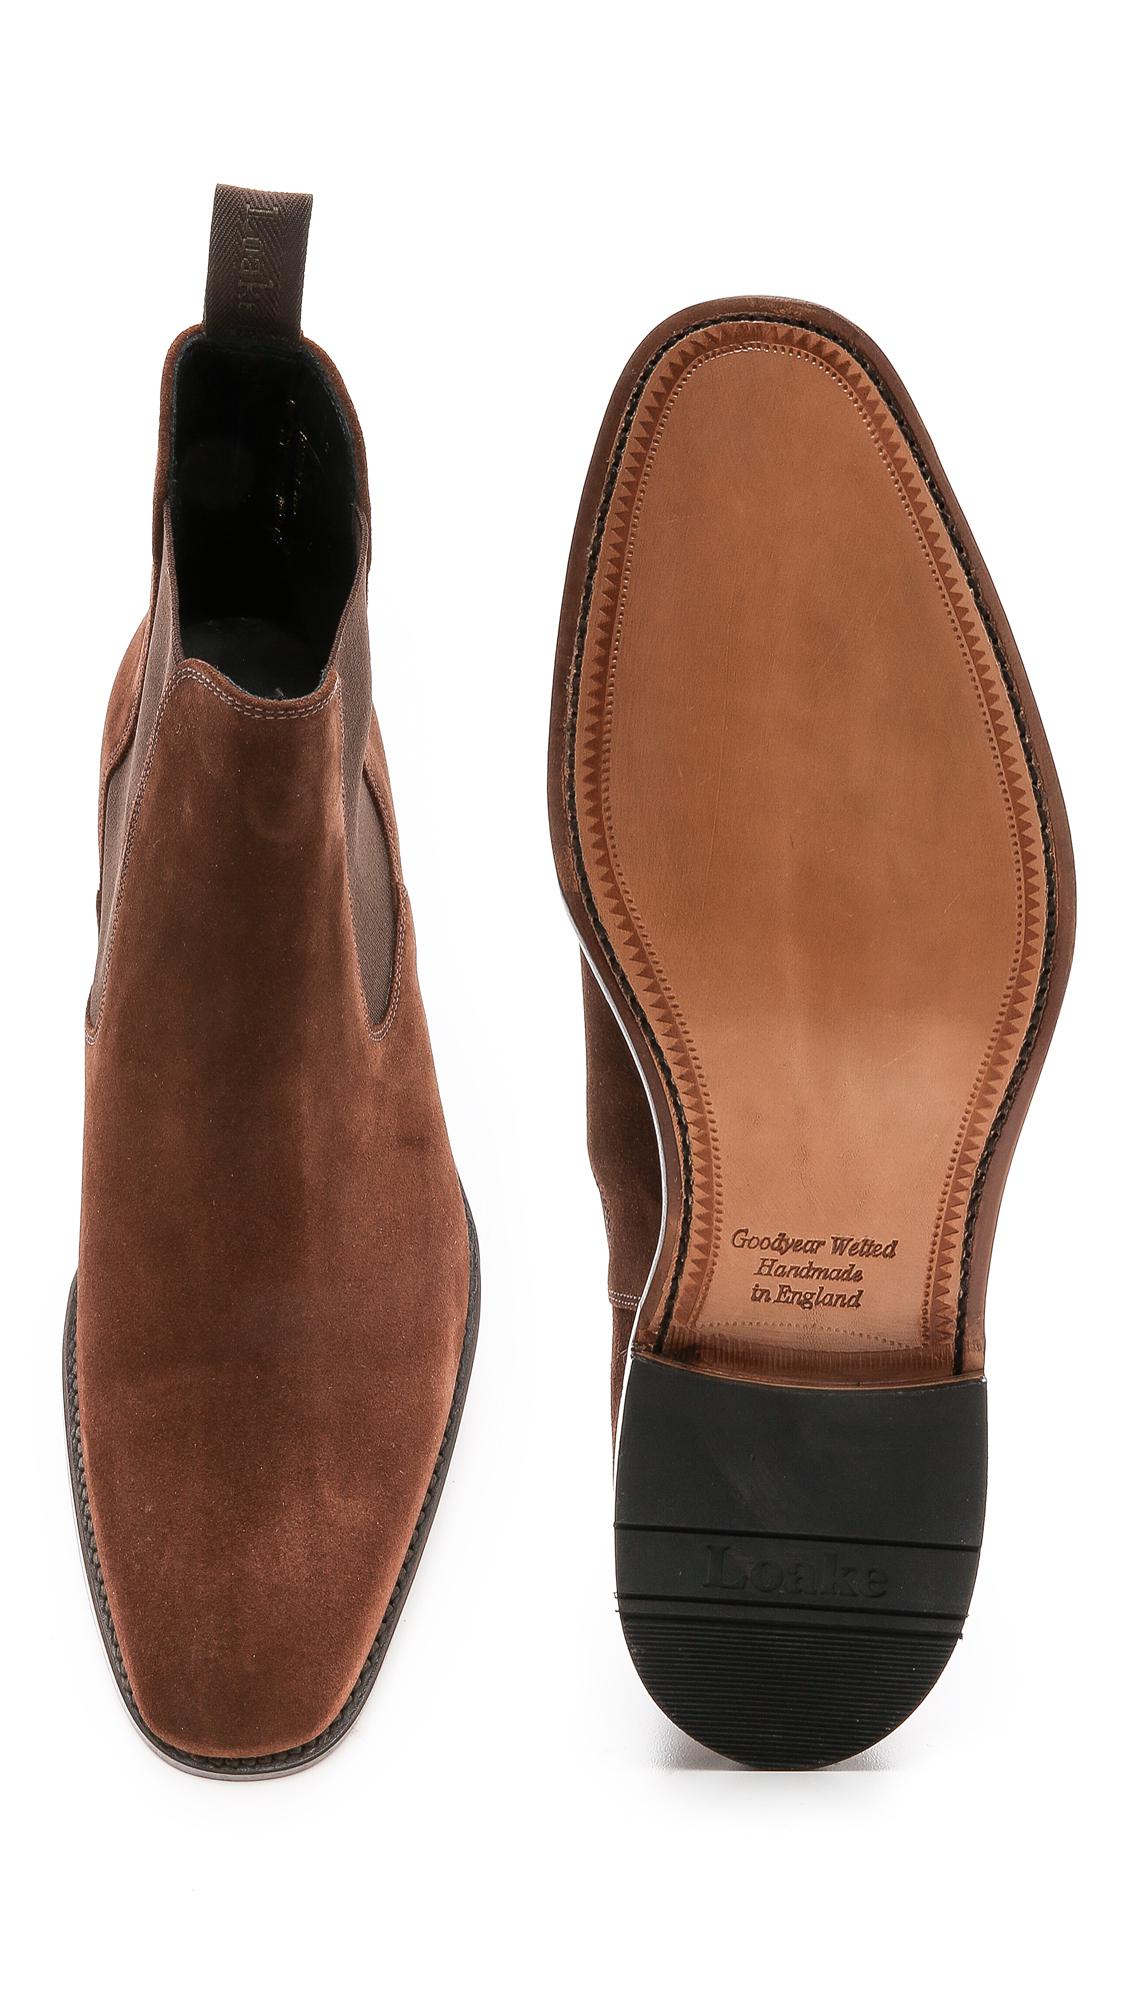 Loake Mitchum Suede Chelsea Boots in Brown for Men - Lyst